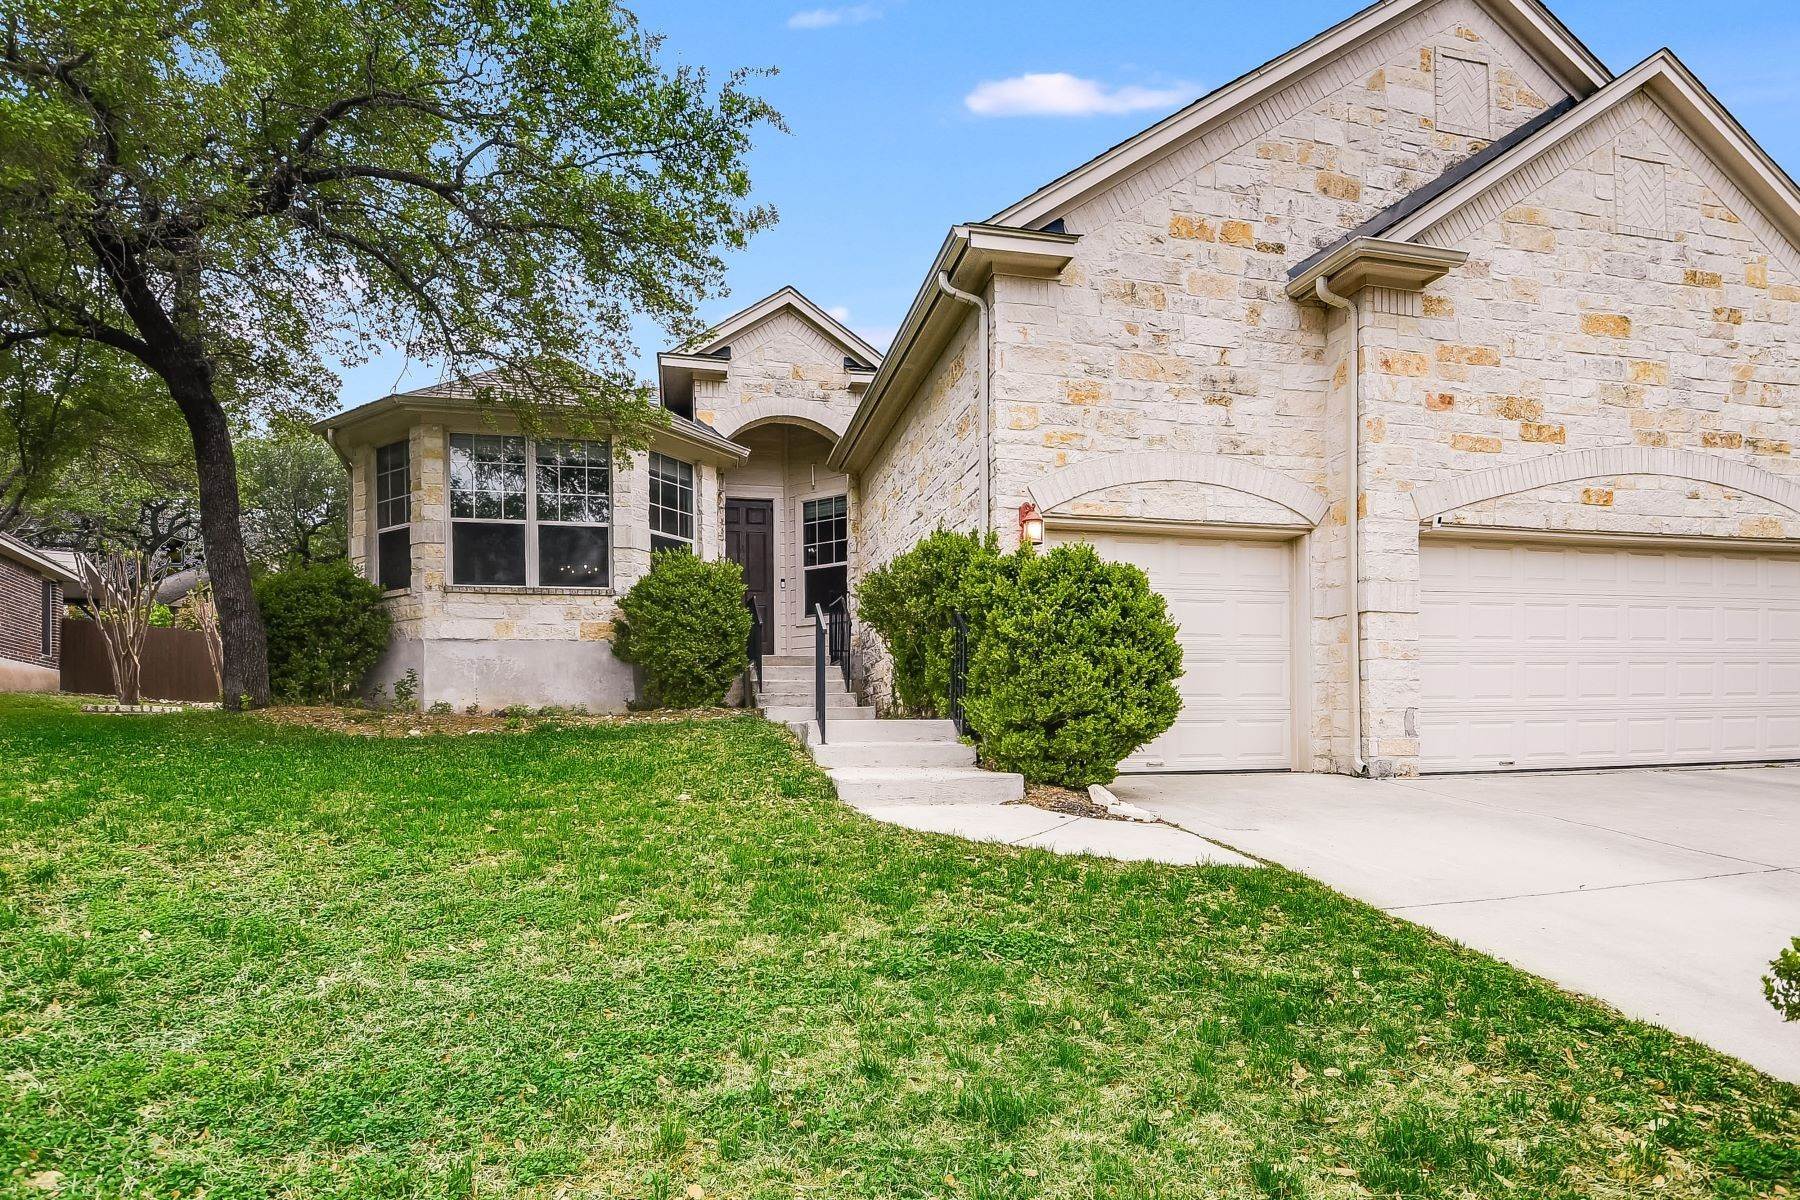 Single Family Homes for Sale at 14727 Los Lunas Road, Helotes, TX 78023 14727 Los Lunas Road Helotes, Texas 78023 United States